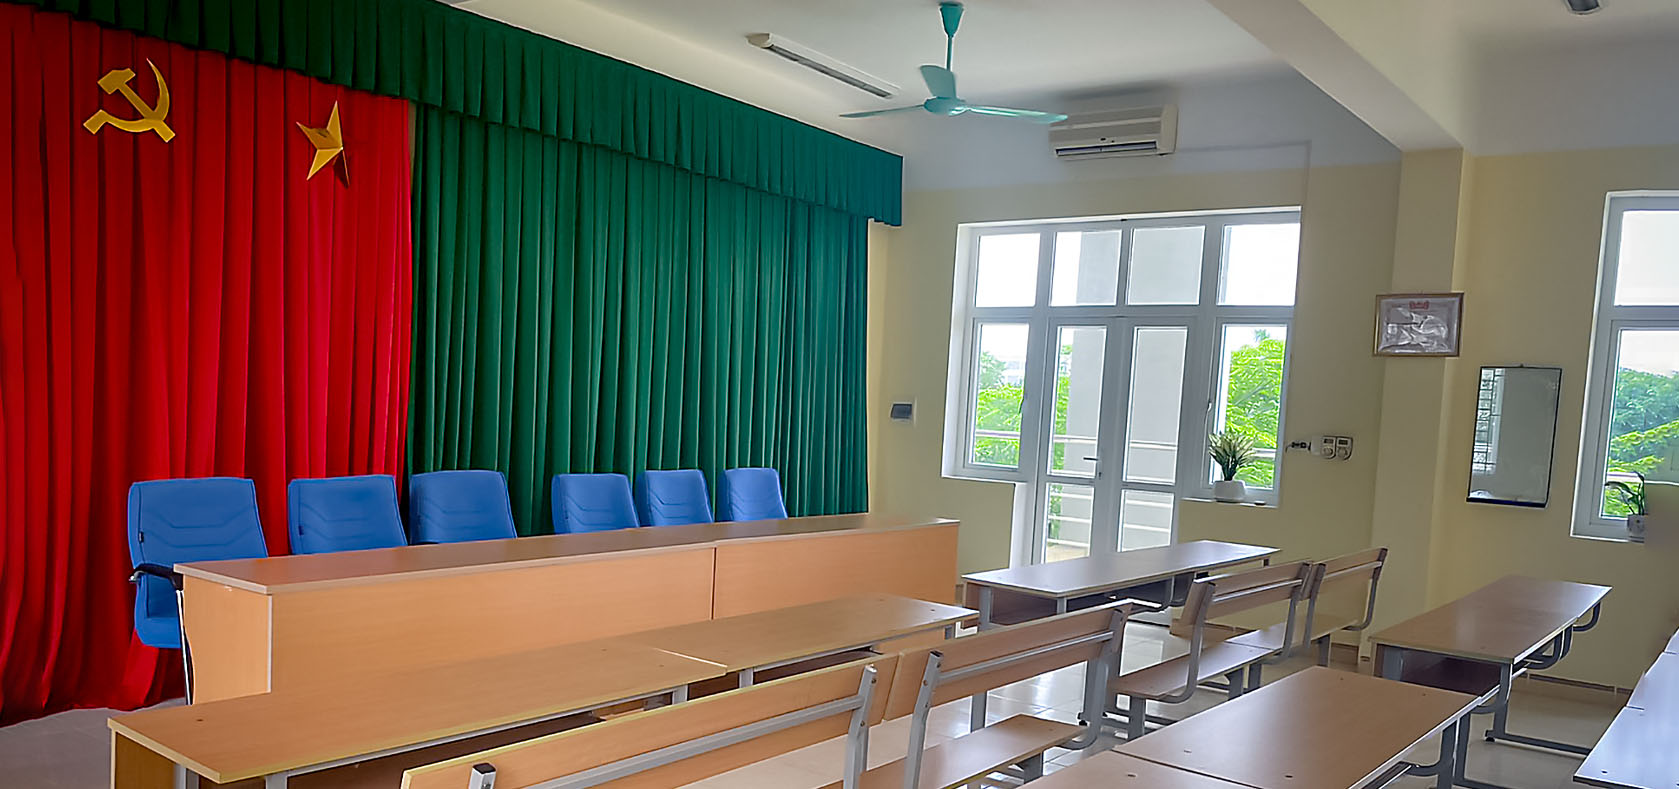 The modest psychological counselling room at Hong Duc University, shown in June 2022. Photo: UN Women/Thao Hoang